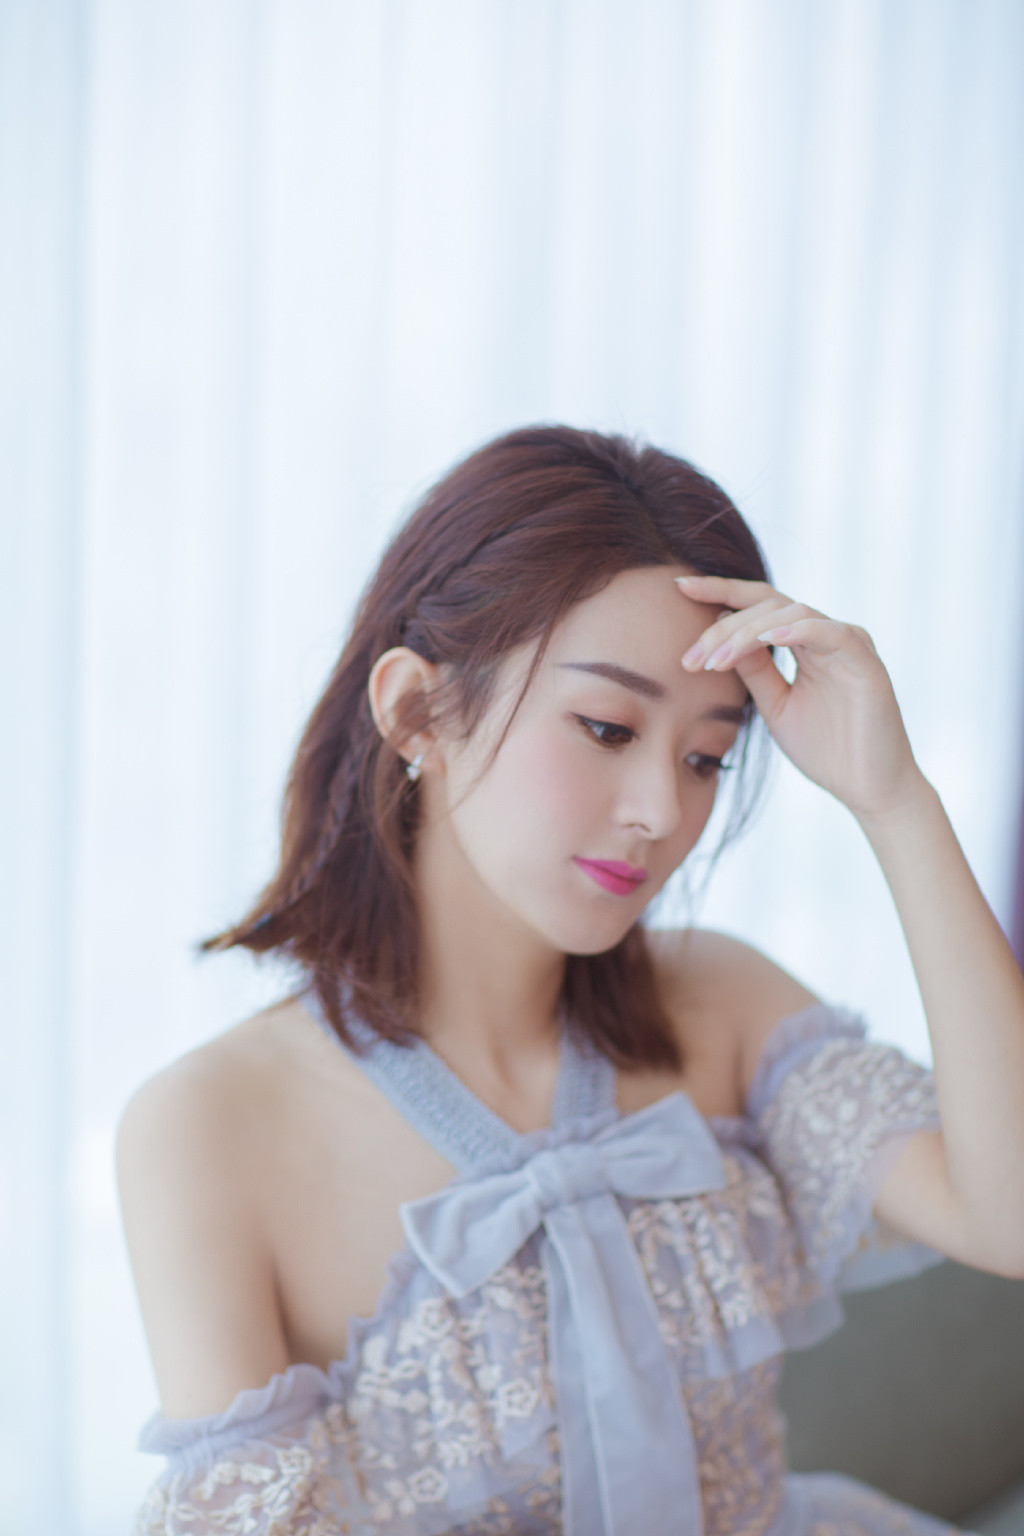 Pop star Zhao Liying releases fashion photos - Chinadaily.com.cn image